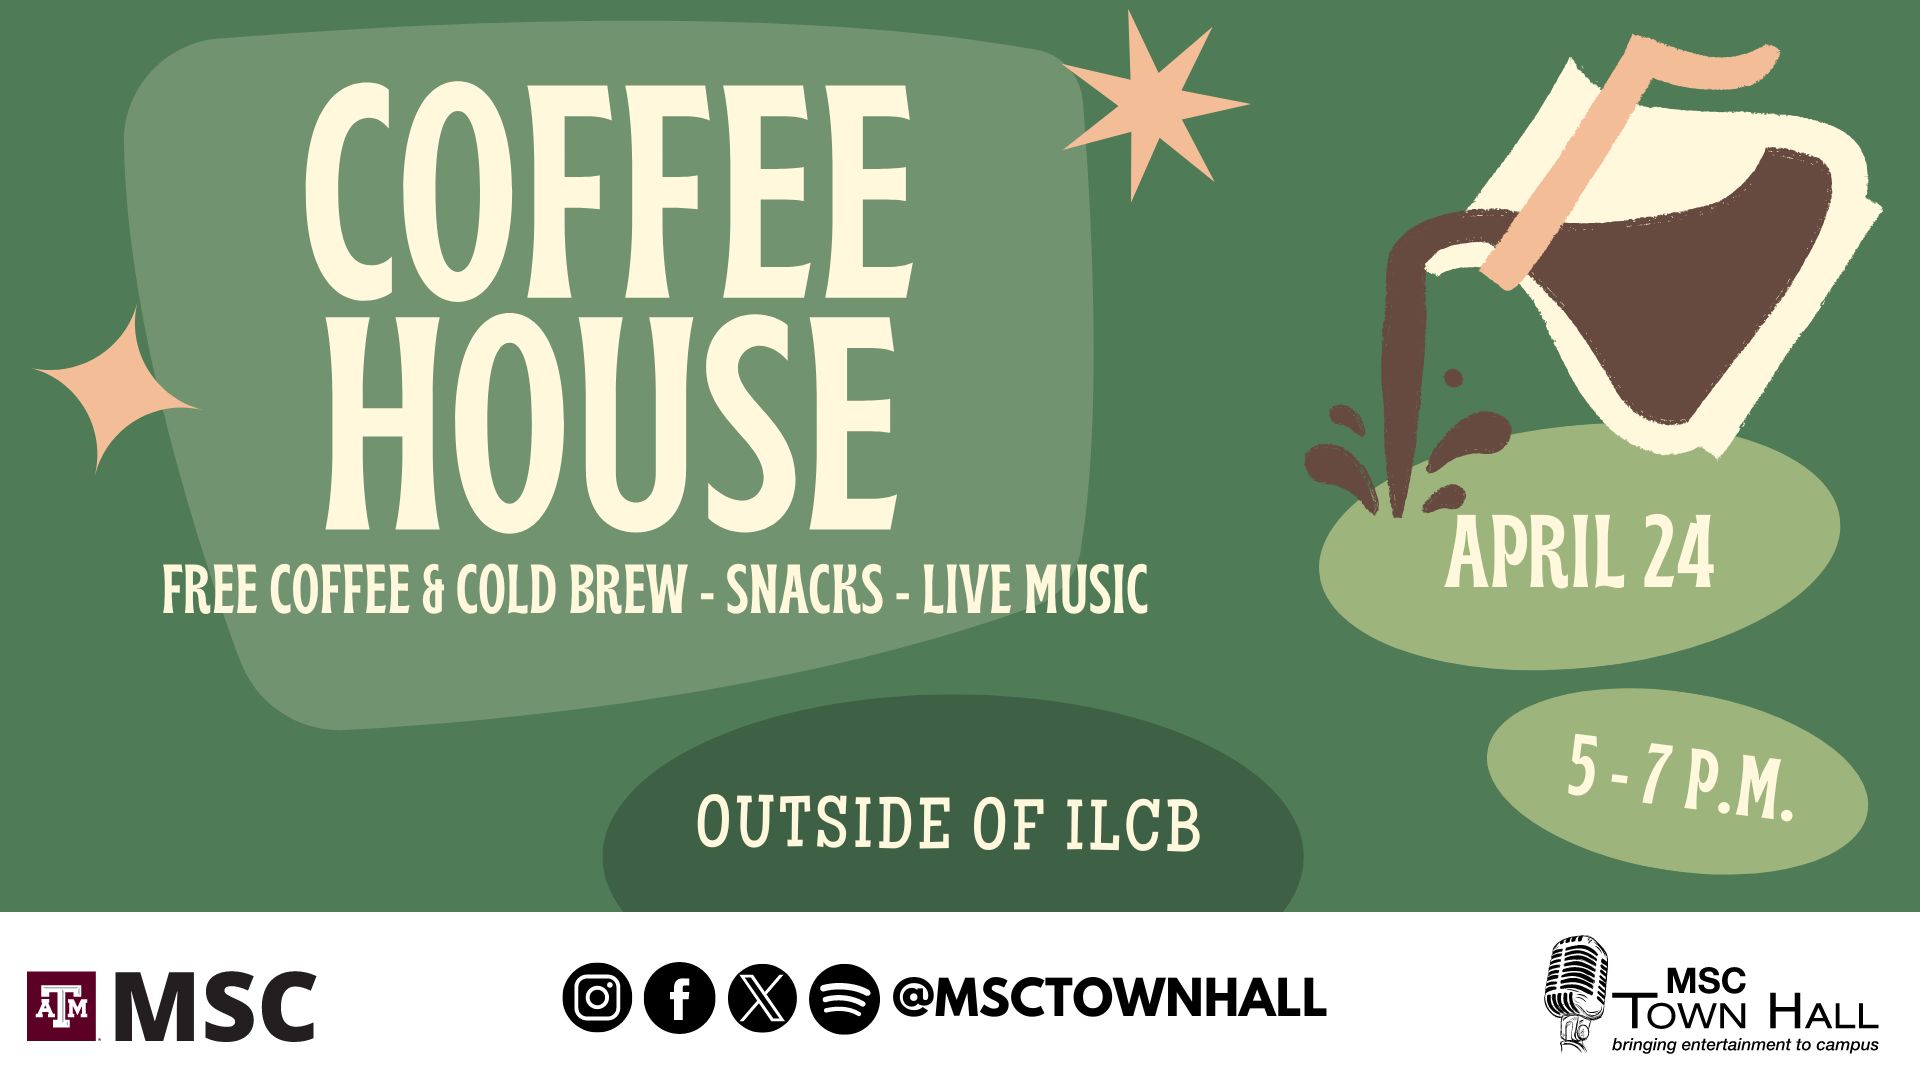 MSC Town Hall Presents CoffeeHouse, April 24 from 5 to 7 p.m. Outside of ILCB. Free Coffee and Cold Brew, snacks and live music. Instagram , Facebook, Twitter, Spotify @msctownhall